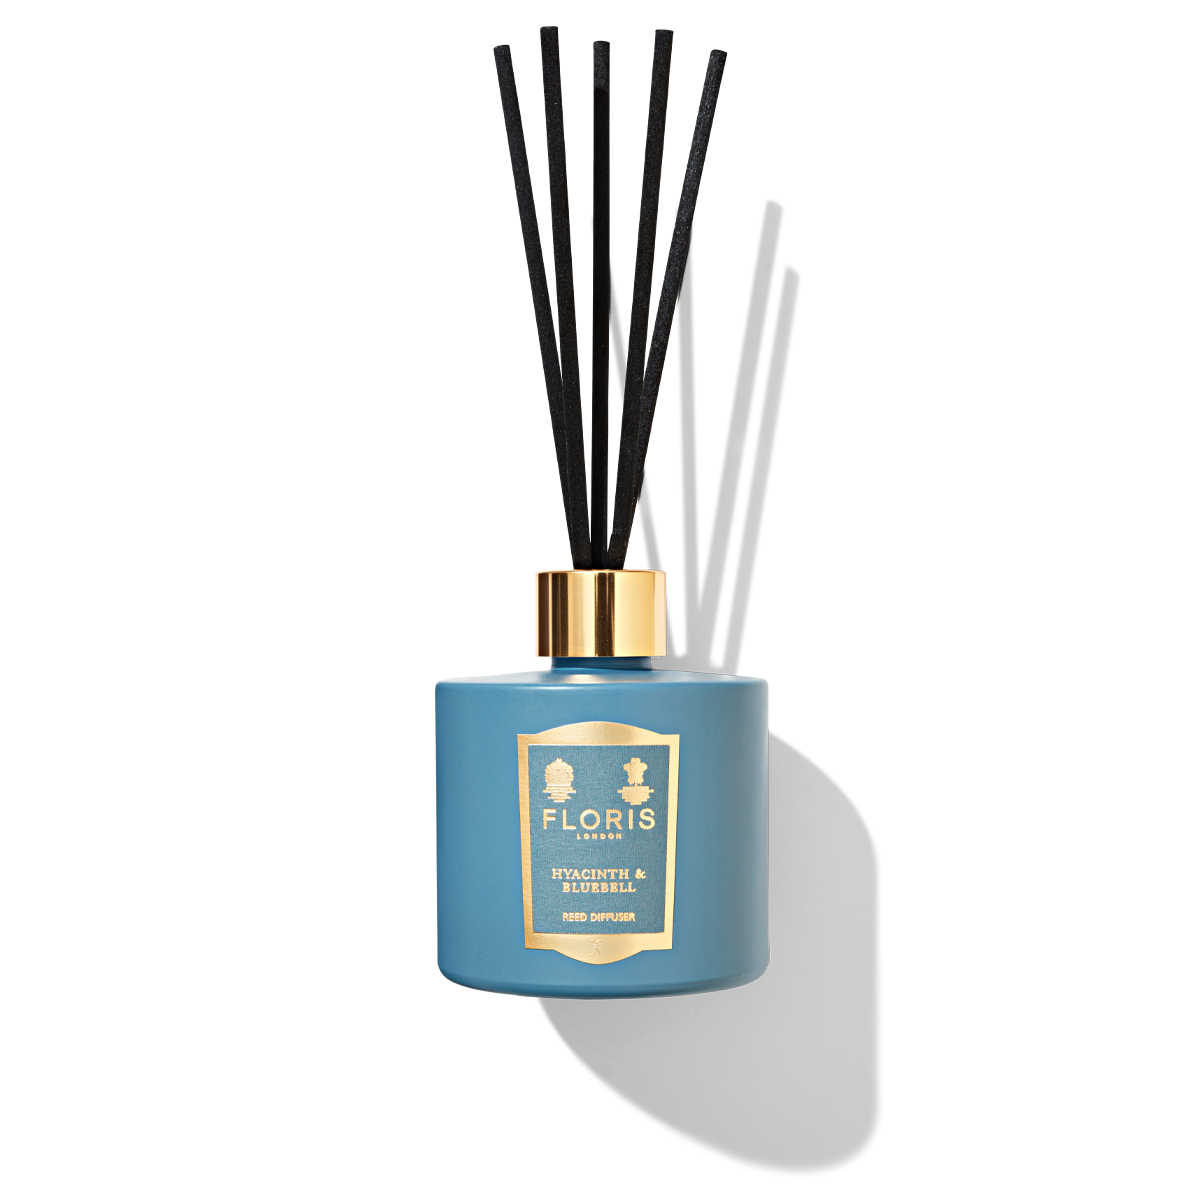 Sky blue reed diffuser bottle with 5 black reeds in a blue and gold label reading ' hyacinth and bluebell reed diffuser'.